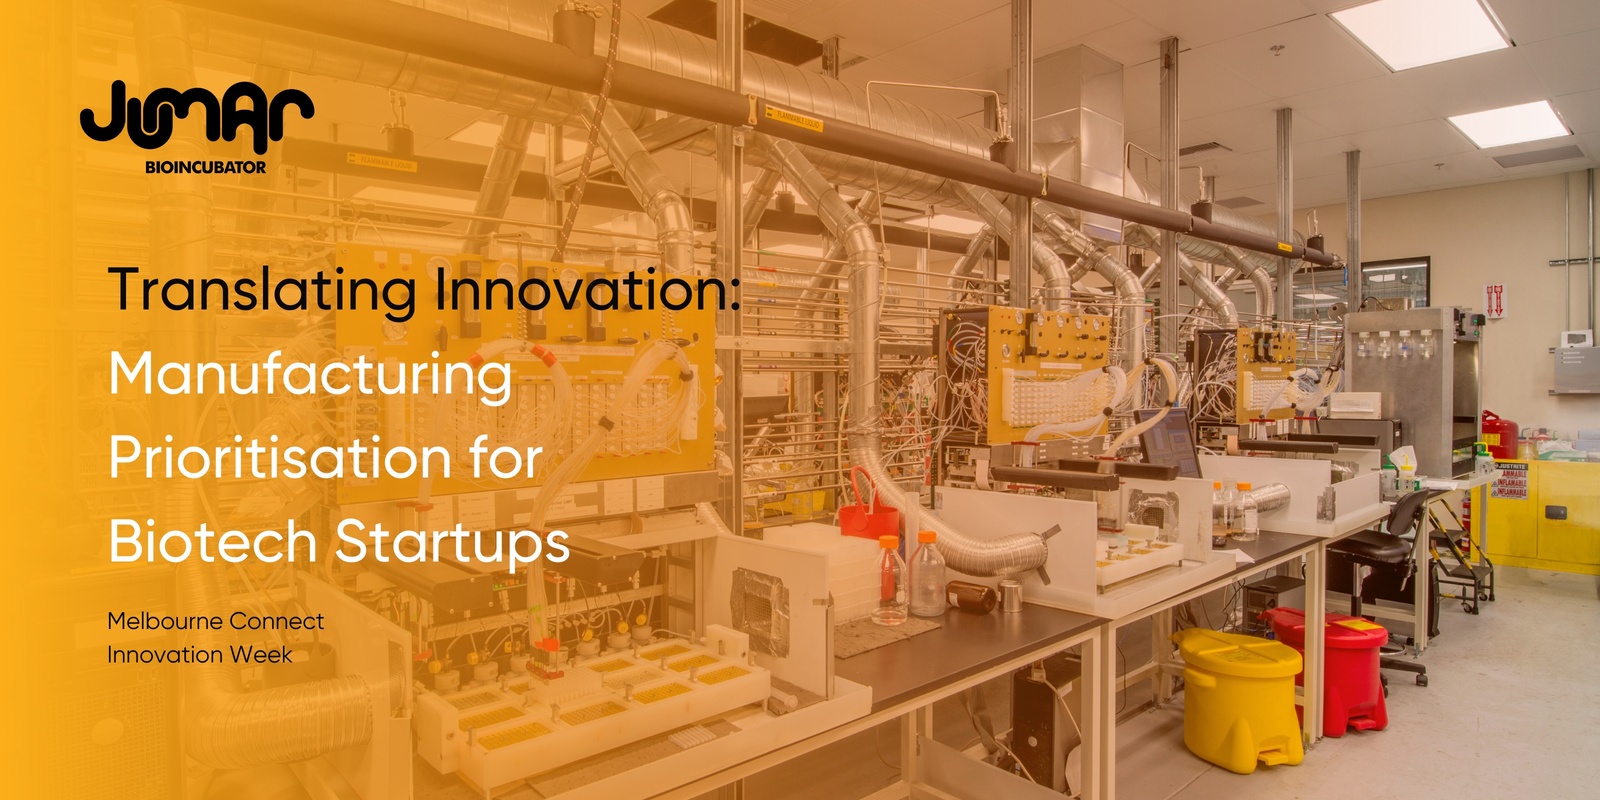 Banner image for Translating Innovation: Manufacturing Priorities for Biotech Startups